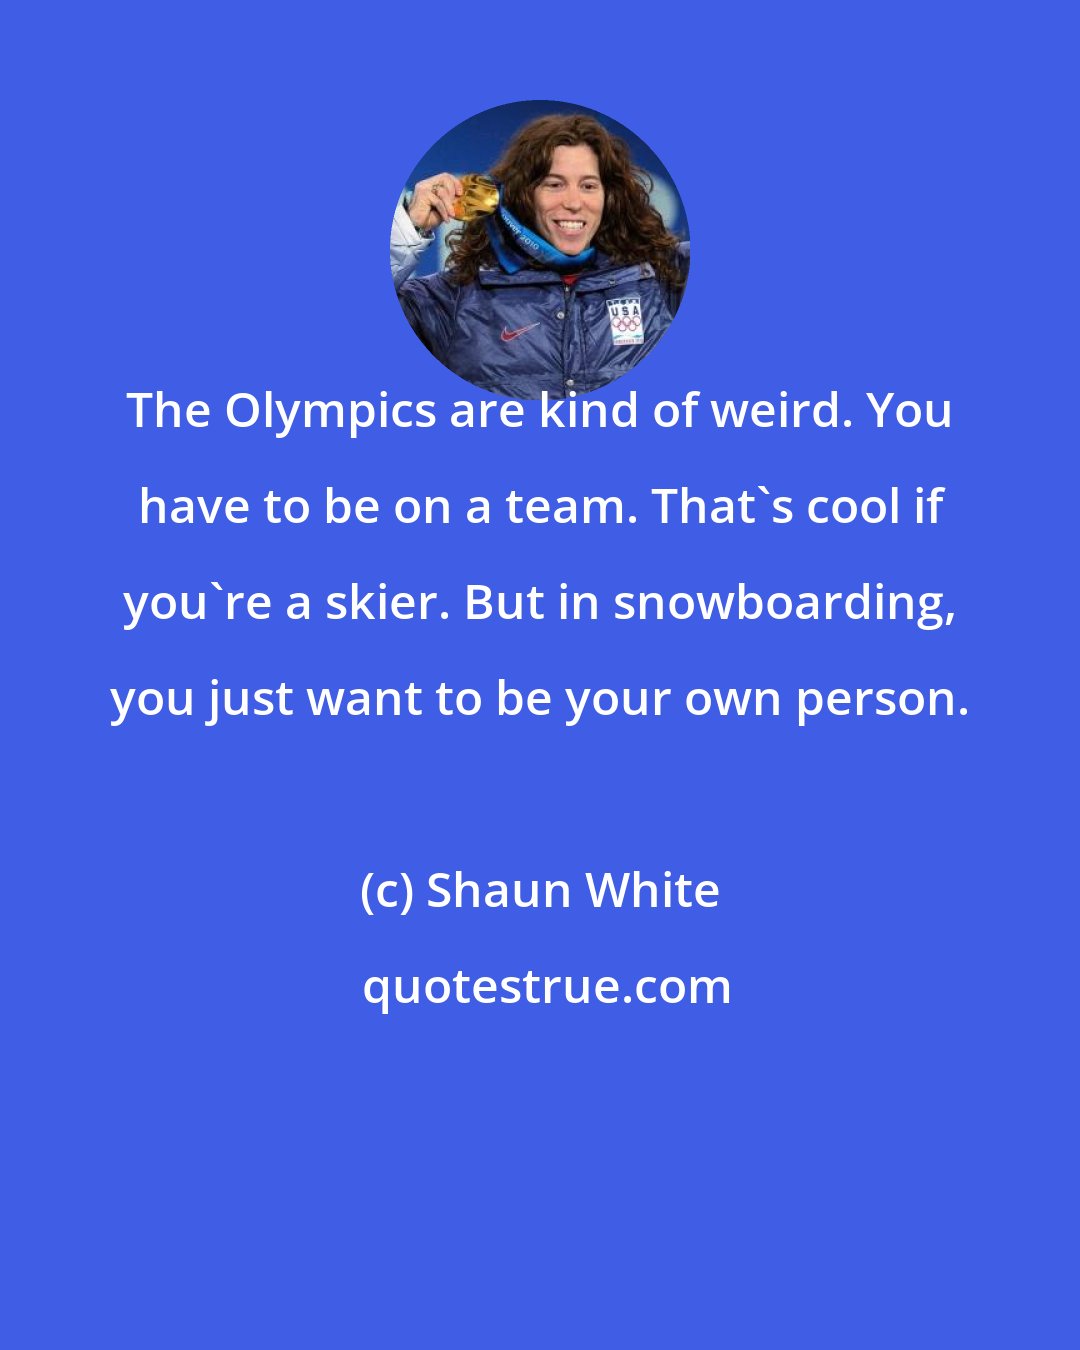 Shaun White: The Olympics are kind of weird. You have to be on a team. That's cool if you're a skier. But in snowboarding, you just want to be your own person.